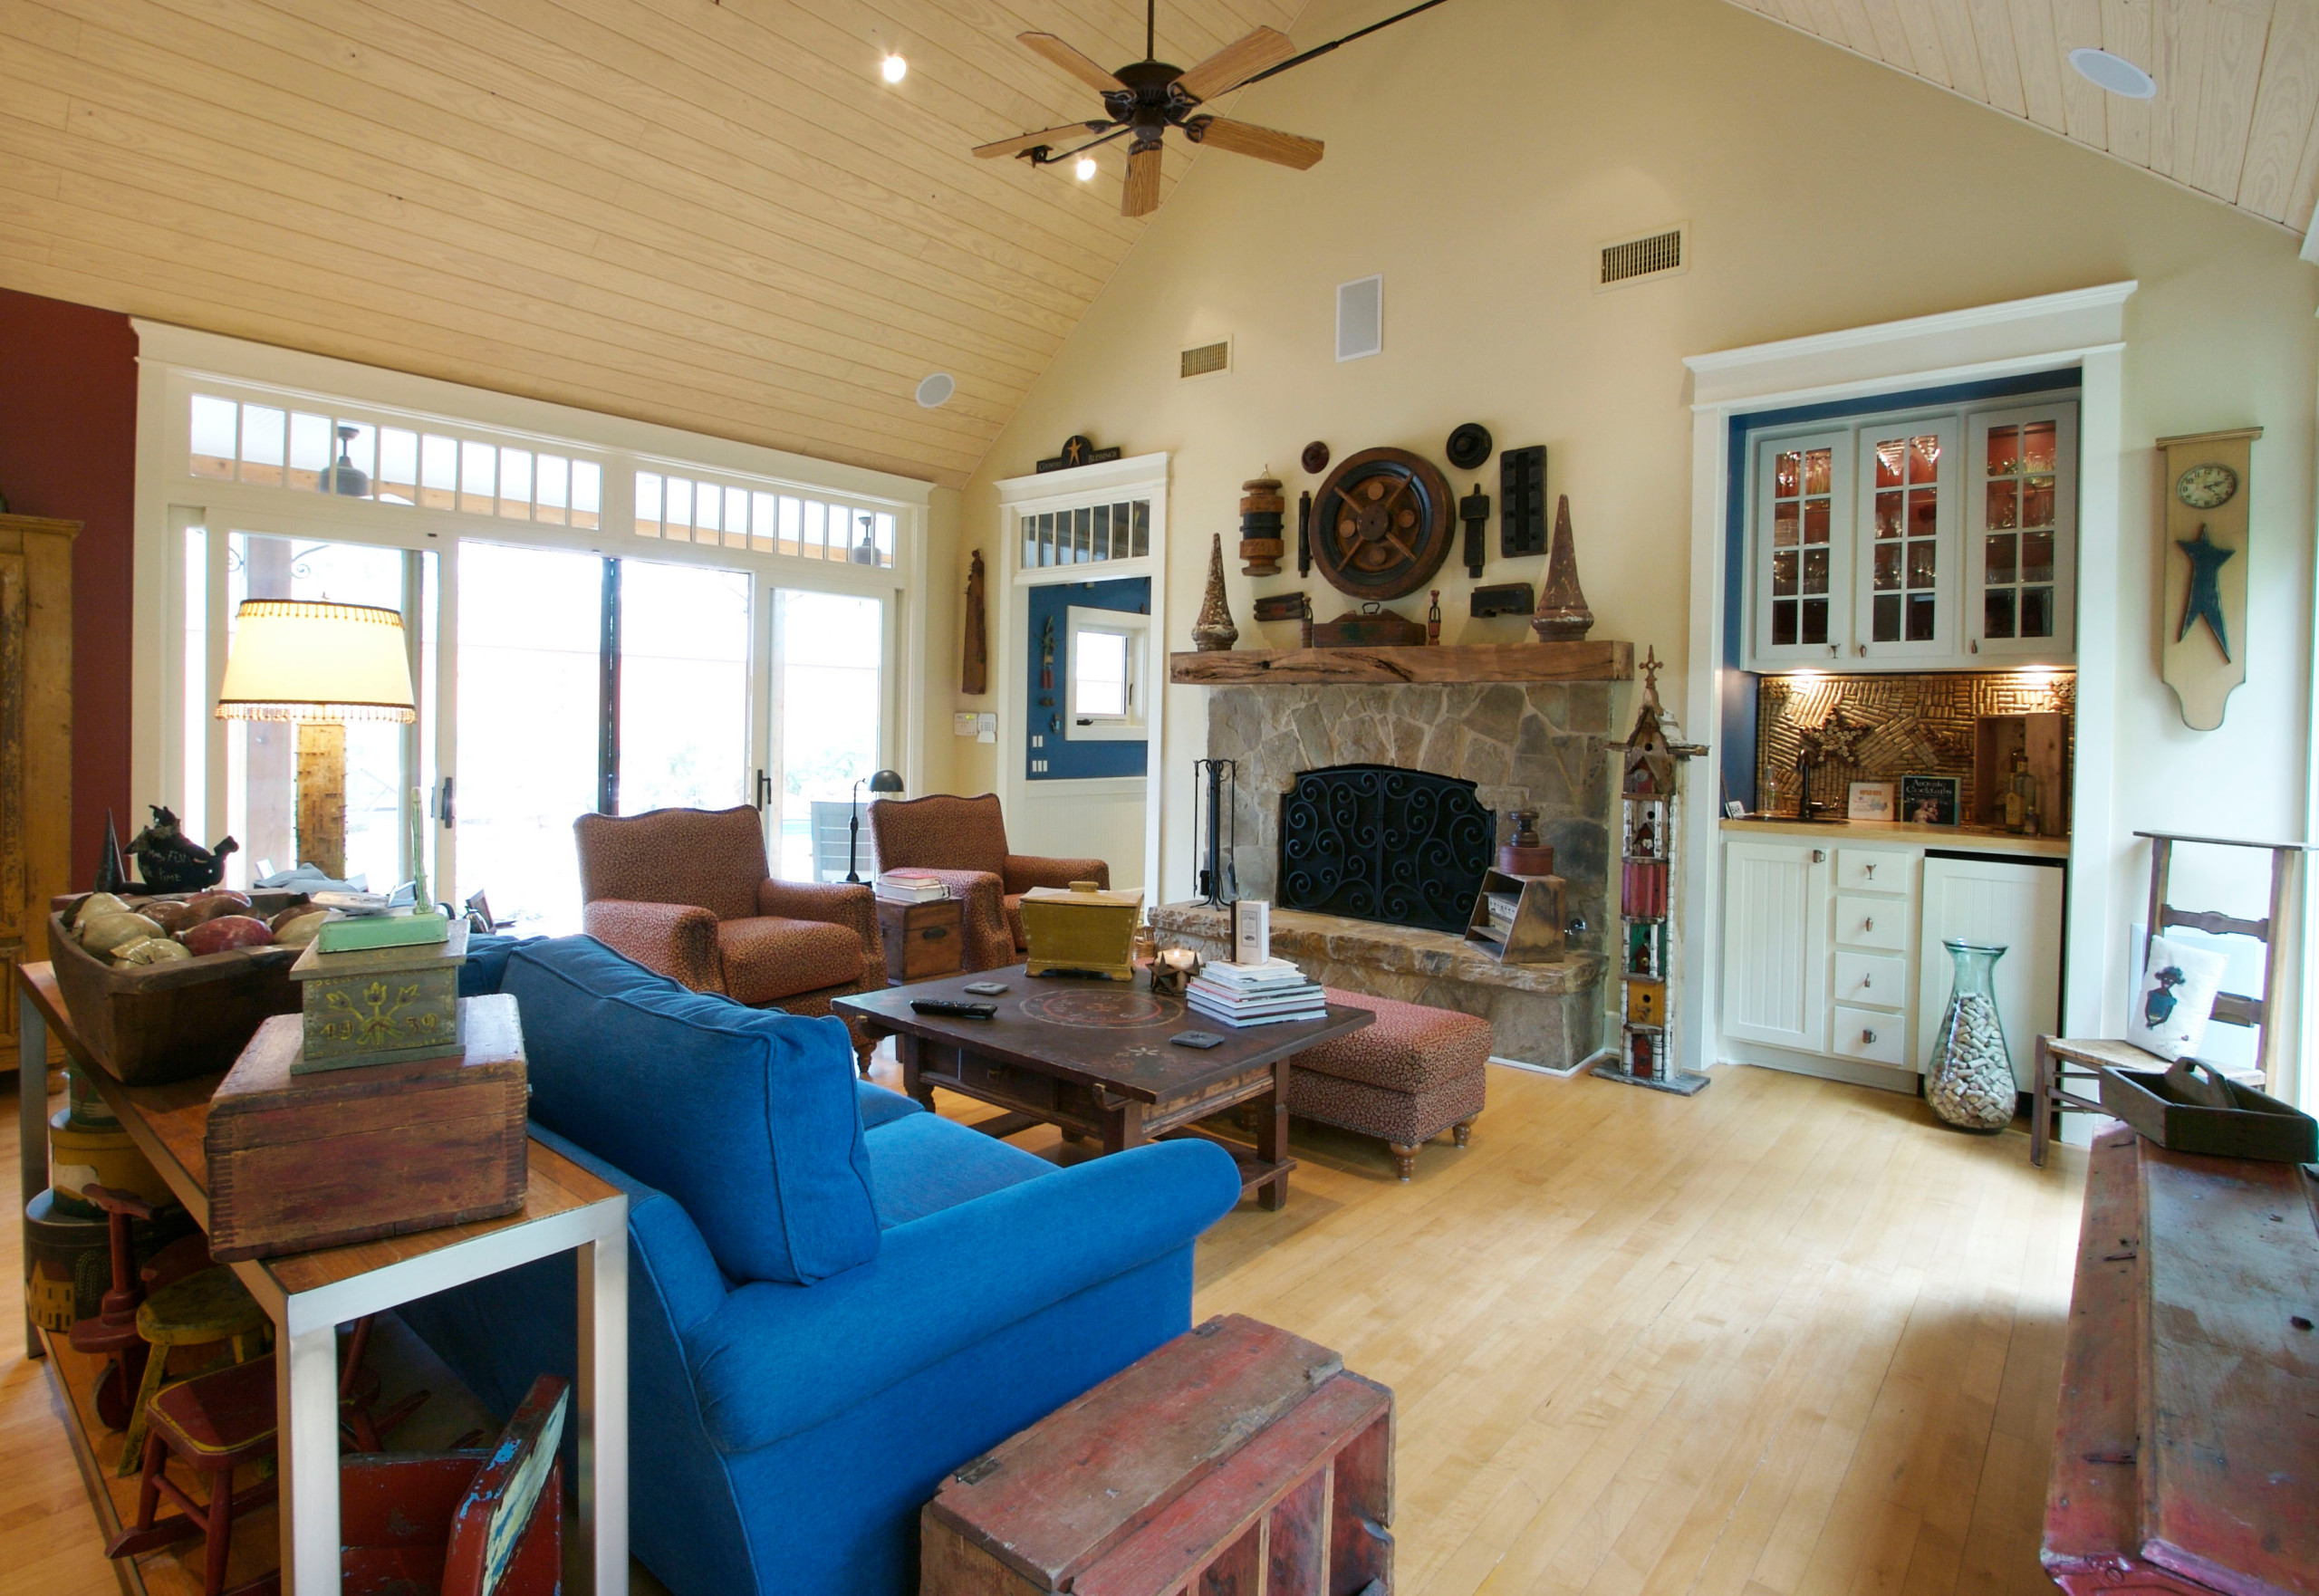 75 Beautiful Shabby Chic Style Living Room With A Bar Pictures Ideas November 21 Houzz